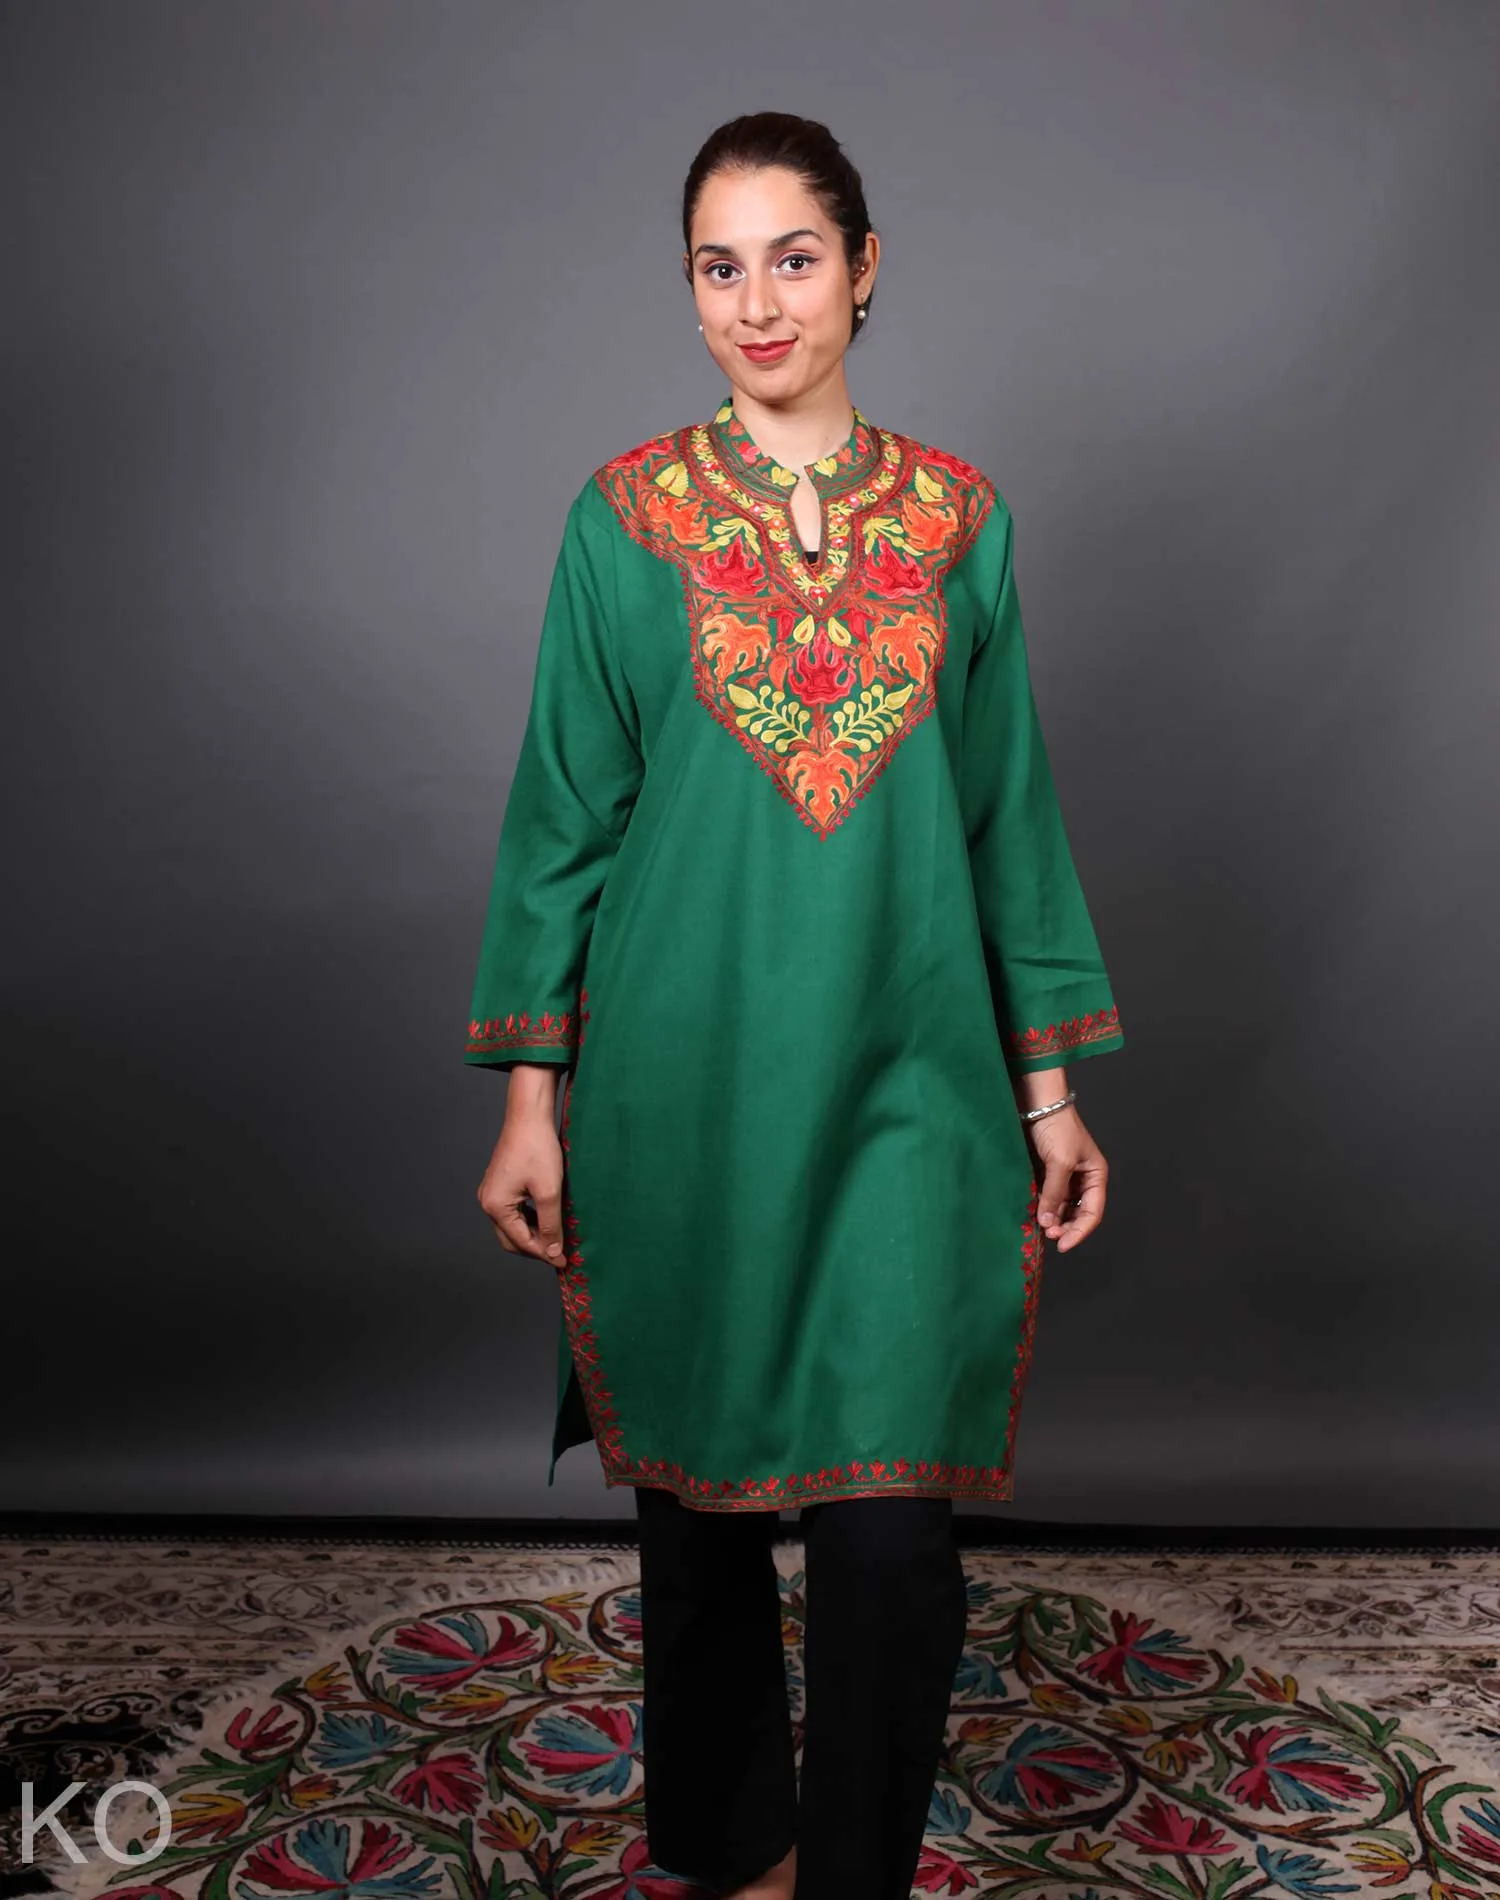 Green Color Cotton Kurta - Material: Our Green Aari Embroidered Cotton Kurti is made with high-quality cotton fabric, ensuring maximum comfort and breathability. - Design: The kurti features intricate aari embroidery in a beautiful green color, showcasing the rich craftsmanship of Kashmir. - Style: With its classic design and flattering silhouette, this kurti is perfect for both casual and formal occasions. Pair it with your favorite bottoms for a stylish and fashionable look. - Authenticity: At Kashmir Origin, we take pride in offering authentic Kashmiri products. Each piece is carefully handcrafted, keeping the traditions of the region alive.